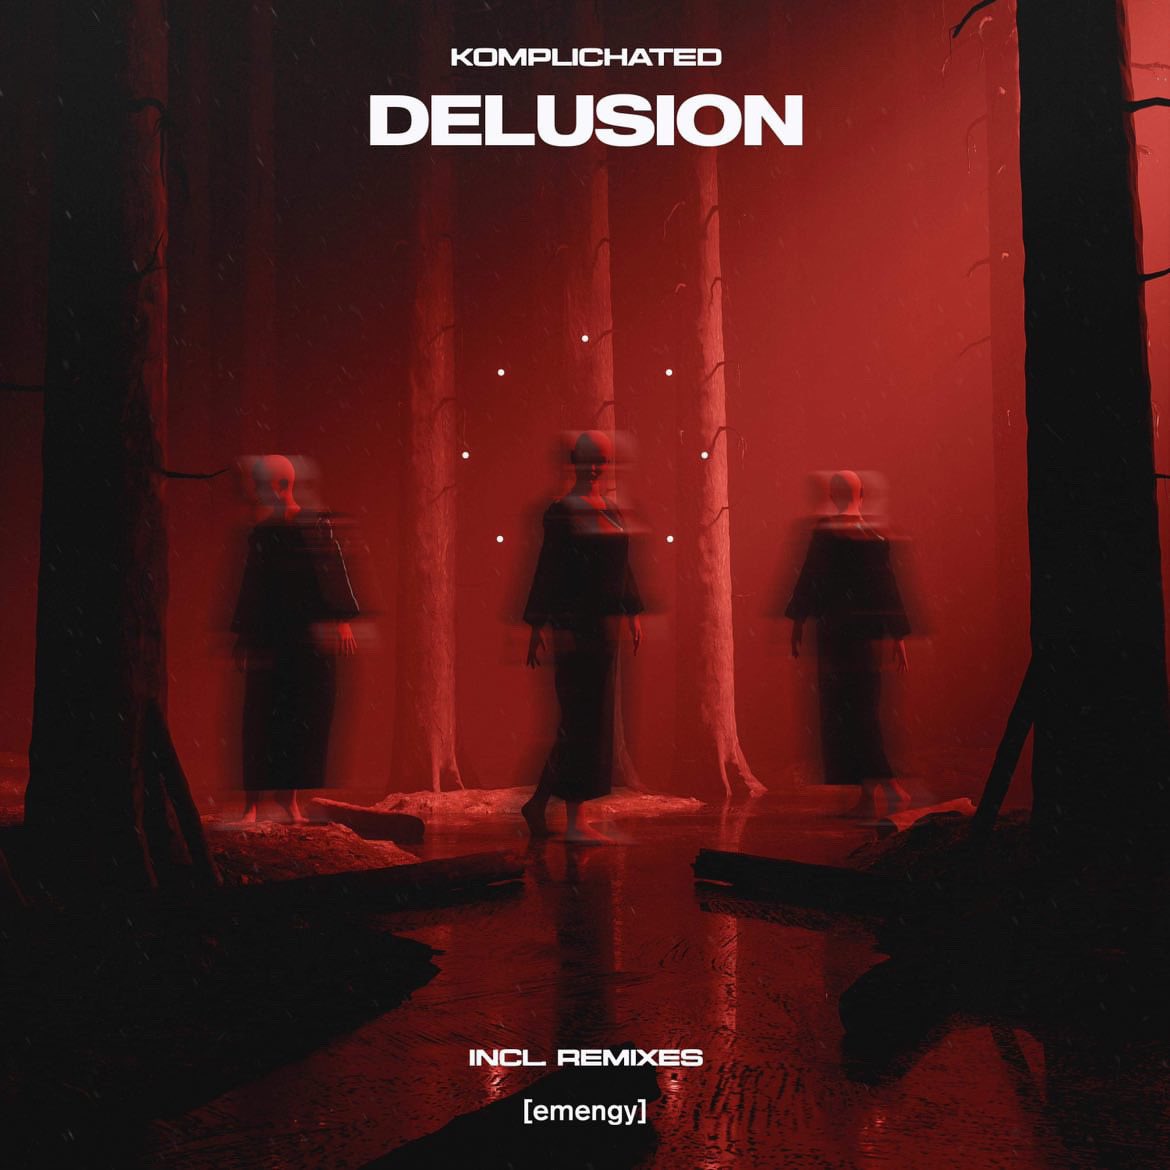 🥀 MUSIC ANNOUNCEMENT 🥀 So stoked to announce that I will be returning to @emengy as an official remix for Komplichated’s DELUSION 🔥 I had such a blast writing this song and I can’t wait for yall to hear! Pre - Save Link in bio 🥀